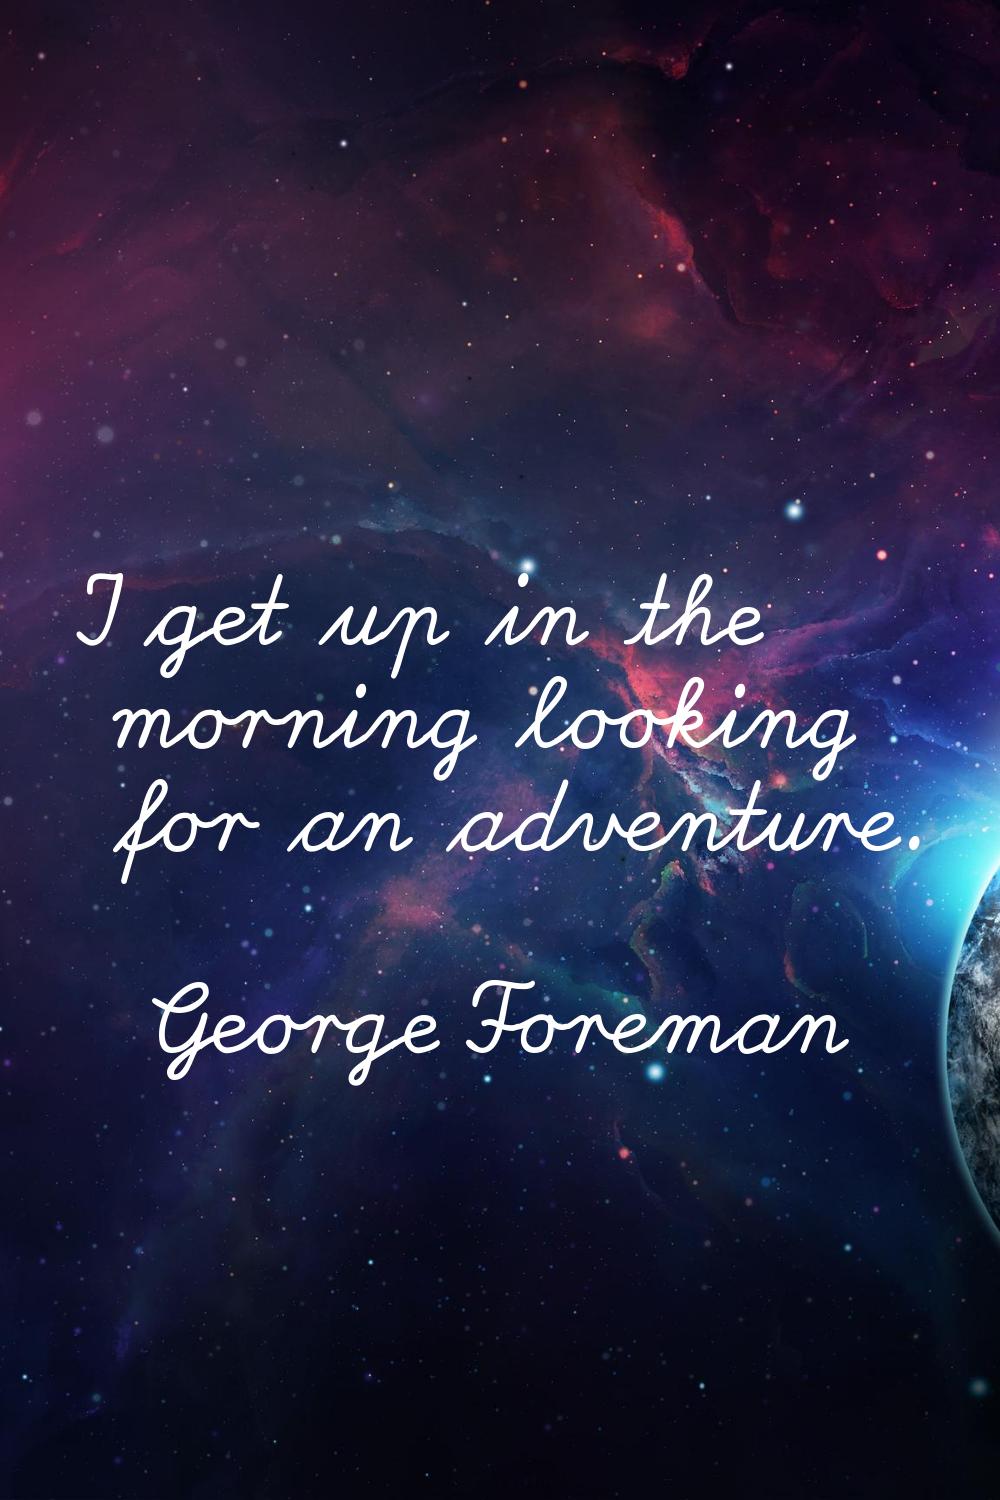 I get up in the morning looking for an adventure.